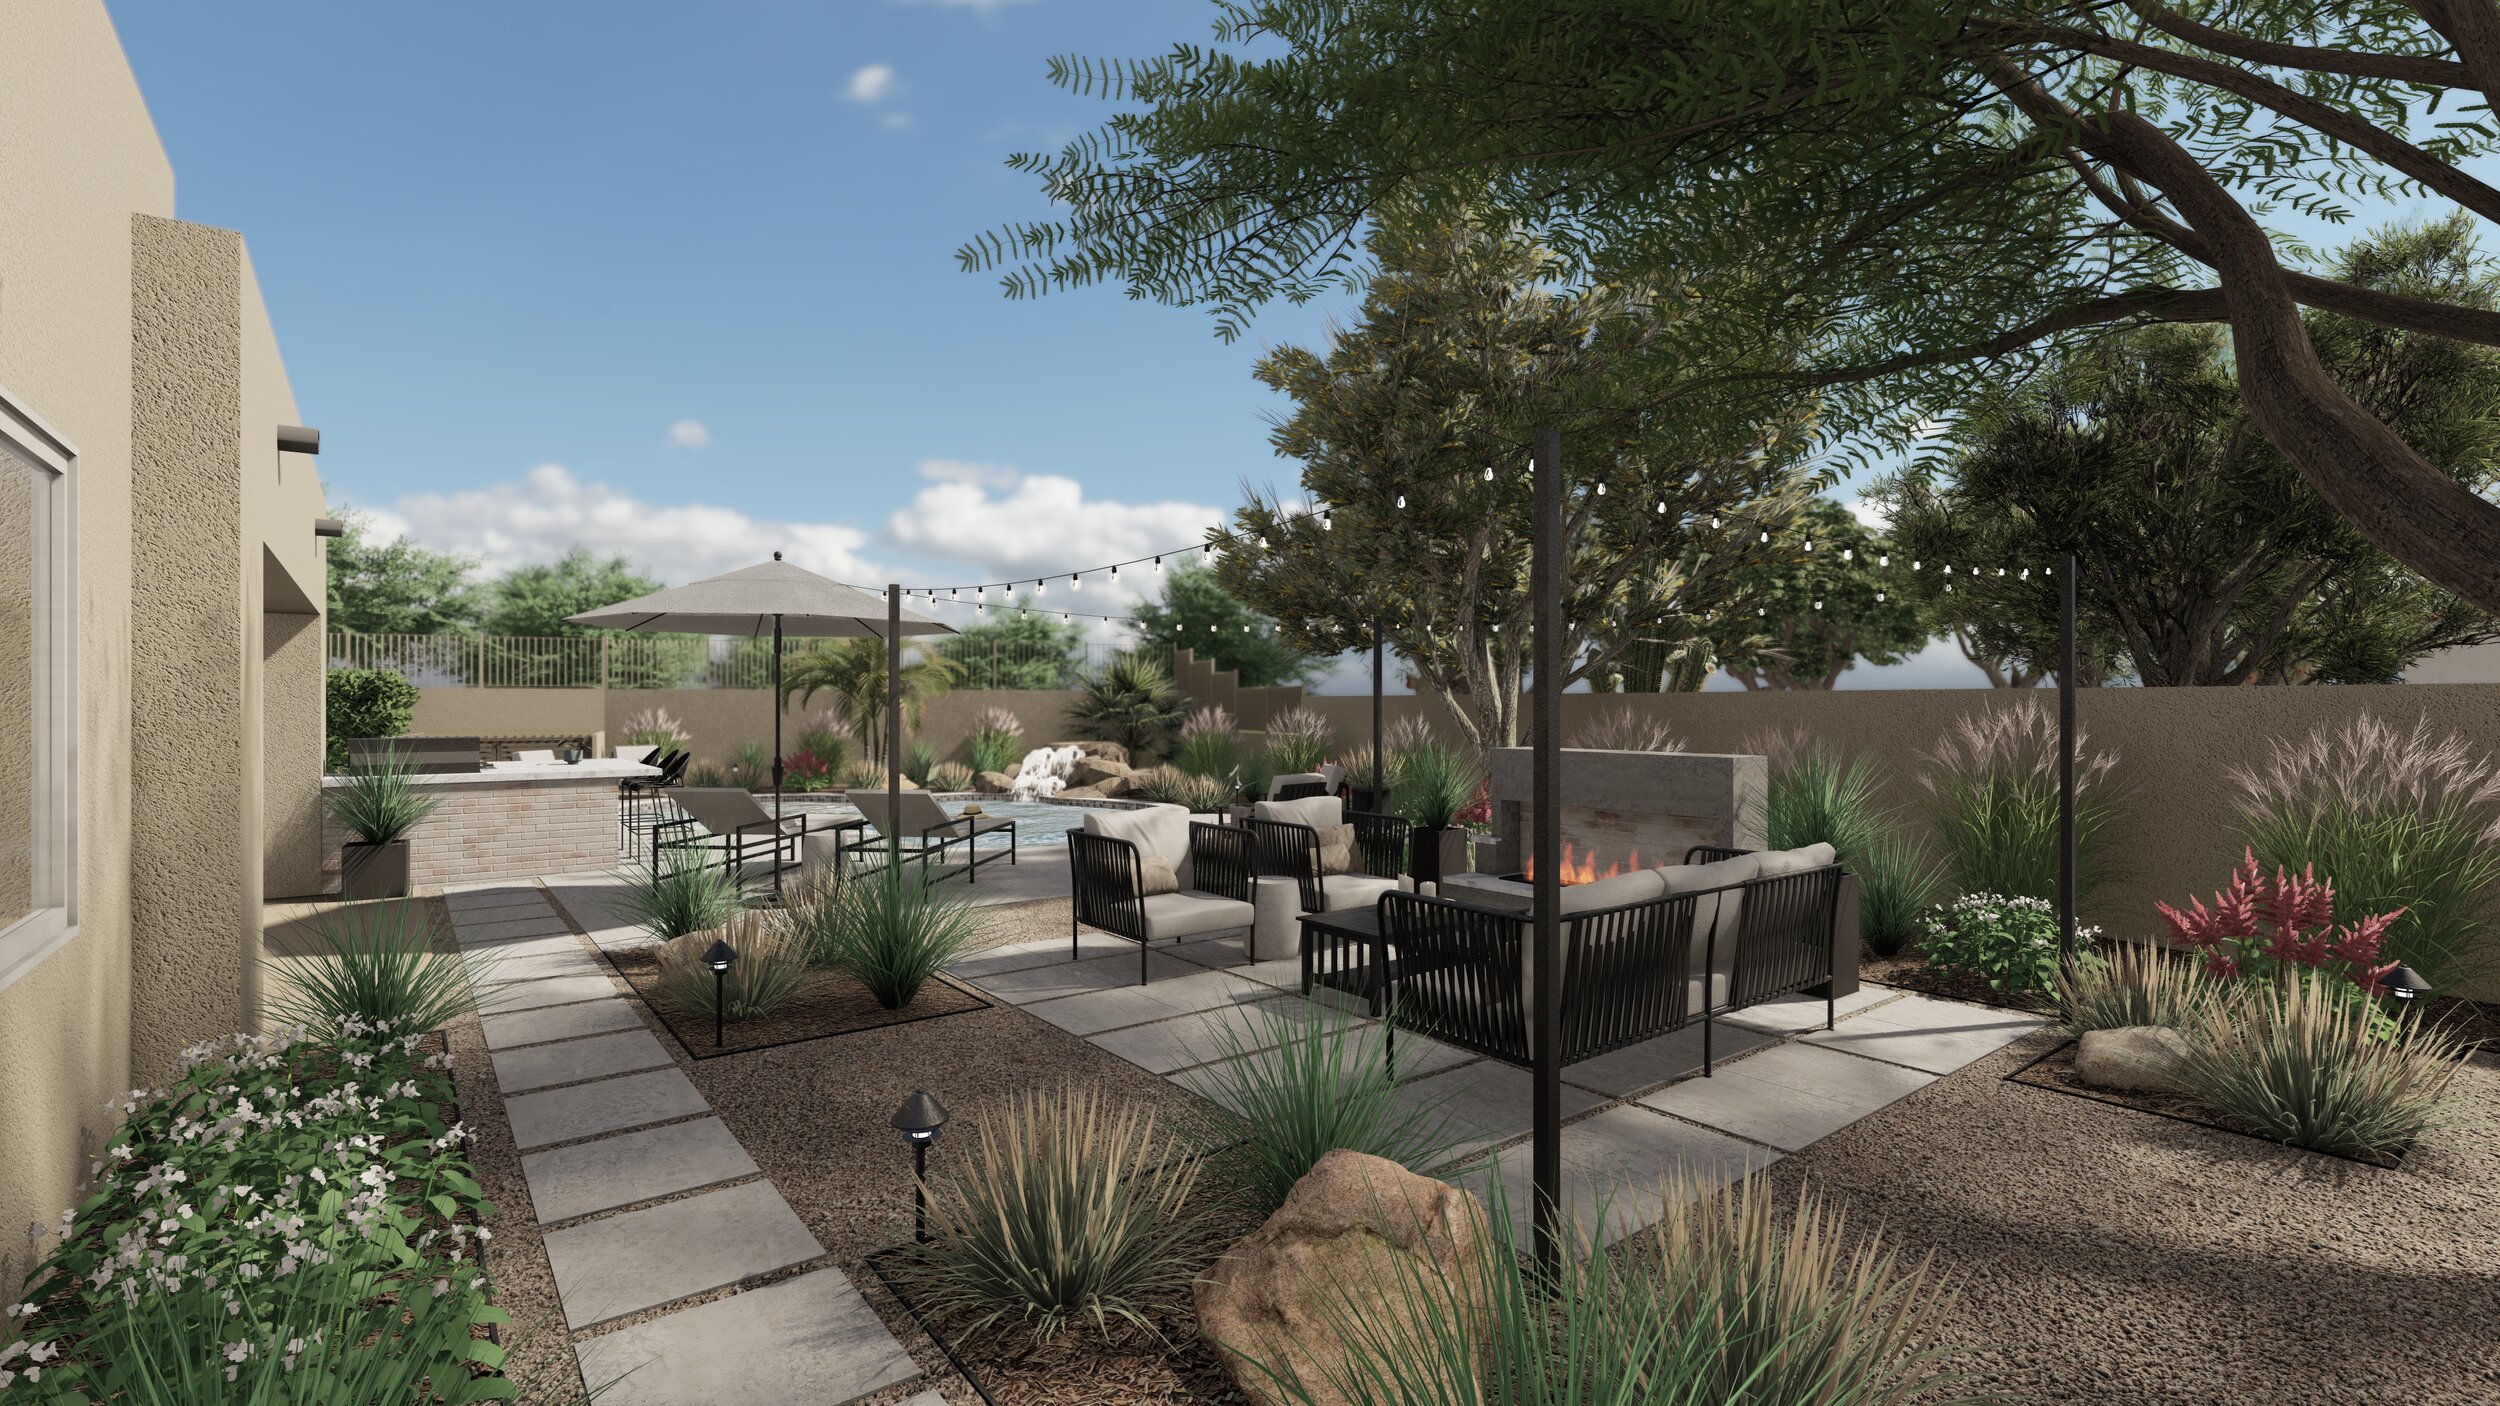 View of desert inspired backyard with swimming pool near outdoor kitchen, lounge area, and fire pit with string lights